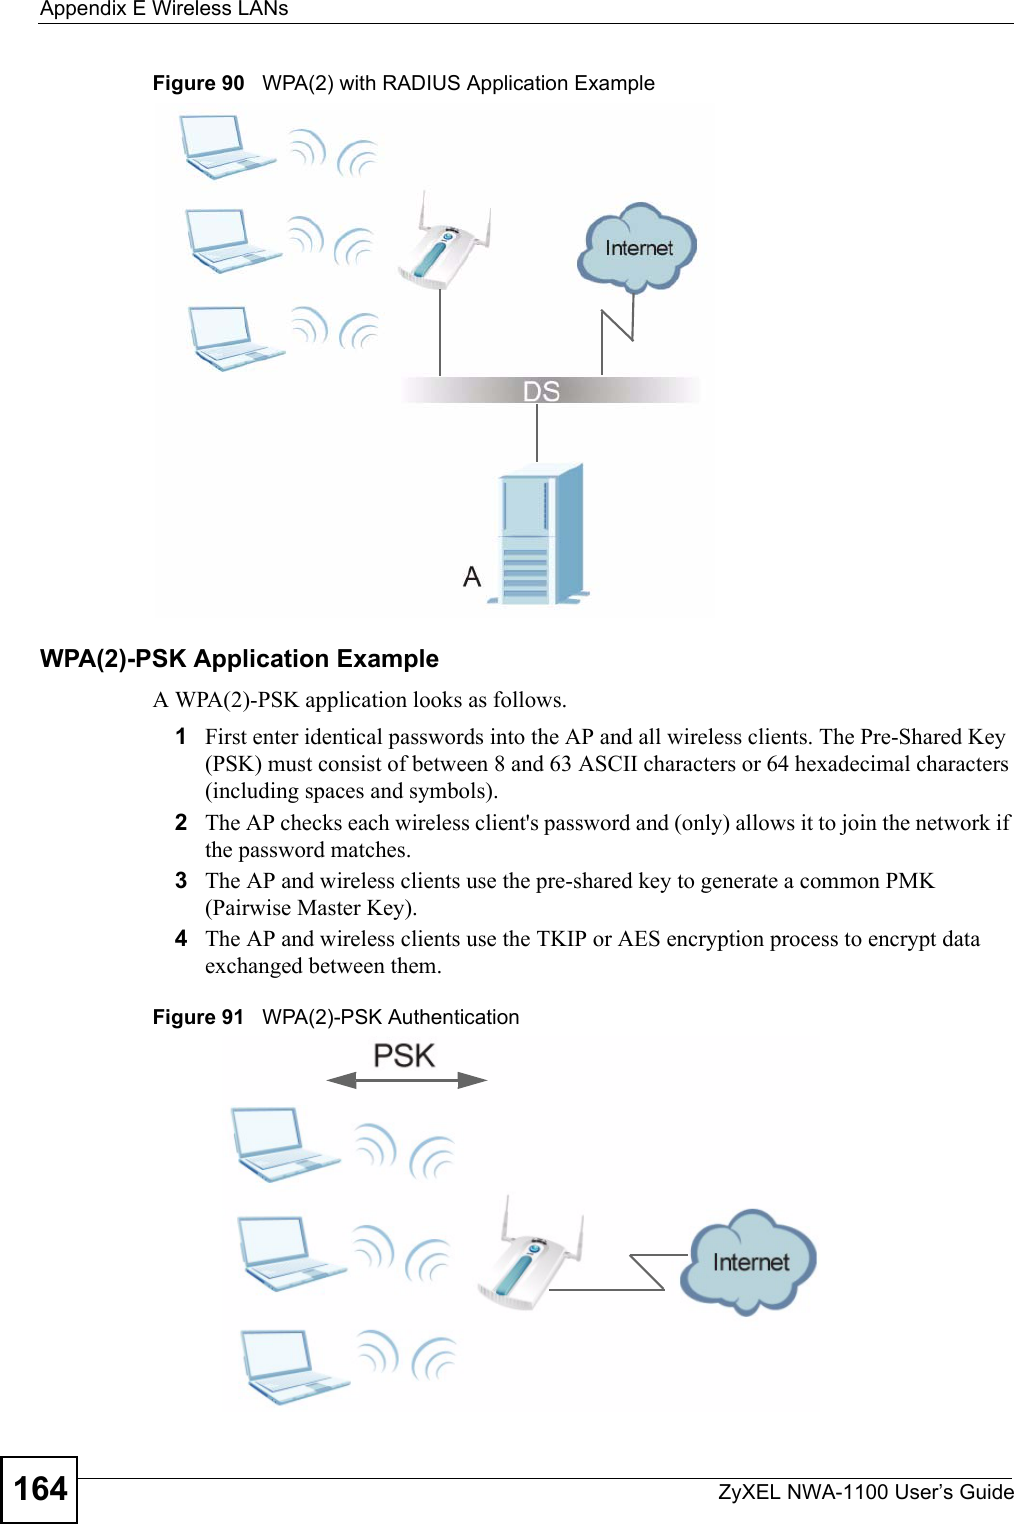 Appendix E Wireless LANsZyXEL NWA-1100 User’s Guide164Figure 90   WPA(2) with RADIUS Application ExampleWPA(2)-PSK Application ExampleA WPA(2)-PSK application looks as follows.1First enter identical passwords into the AP and all wireless clients. The Pre-Shared Key (PSK) must consist of between 8 and 63 ASCII characters or 64 hexadecimal characters (including spaces and symbols).2The AP checks each wireless client&apos;s password and (only) allows it to join the network if the password matches.3The AP and wireless clients use the pre-shared key to generate a common PMK (Pairwise Master Key).4The AP and wireless clients use the TKIP or AES encryption process to encrypt data exchanged between them.Figure 91   WPA(2)-PSK Authentication